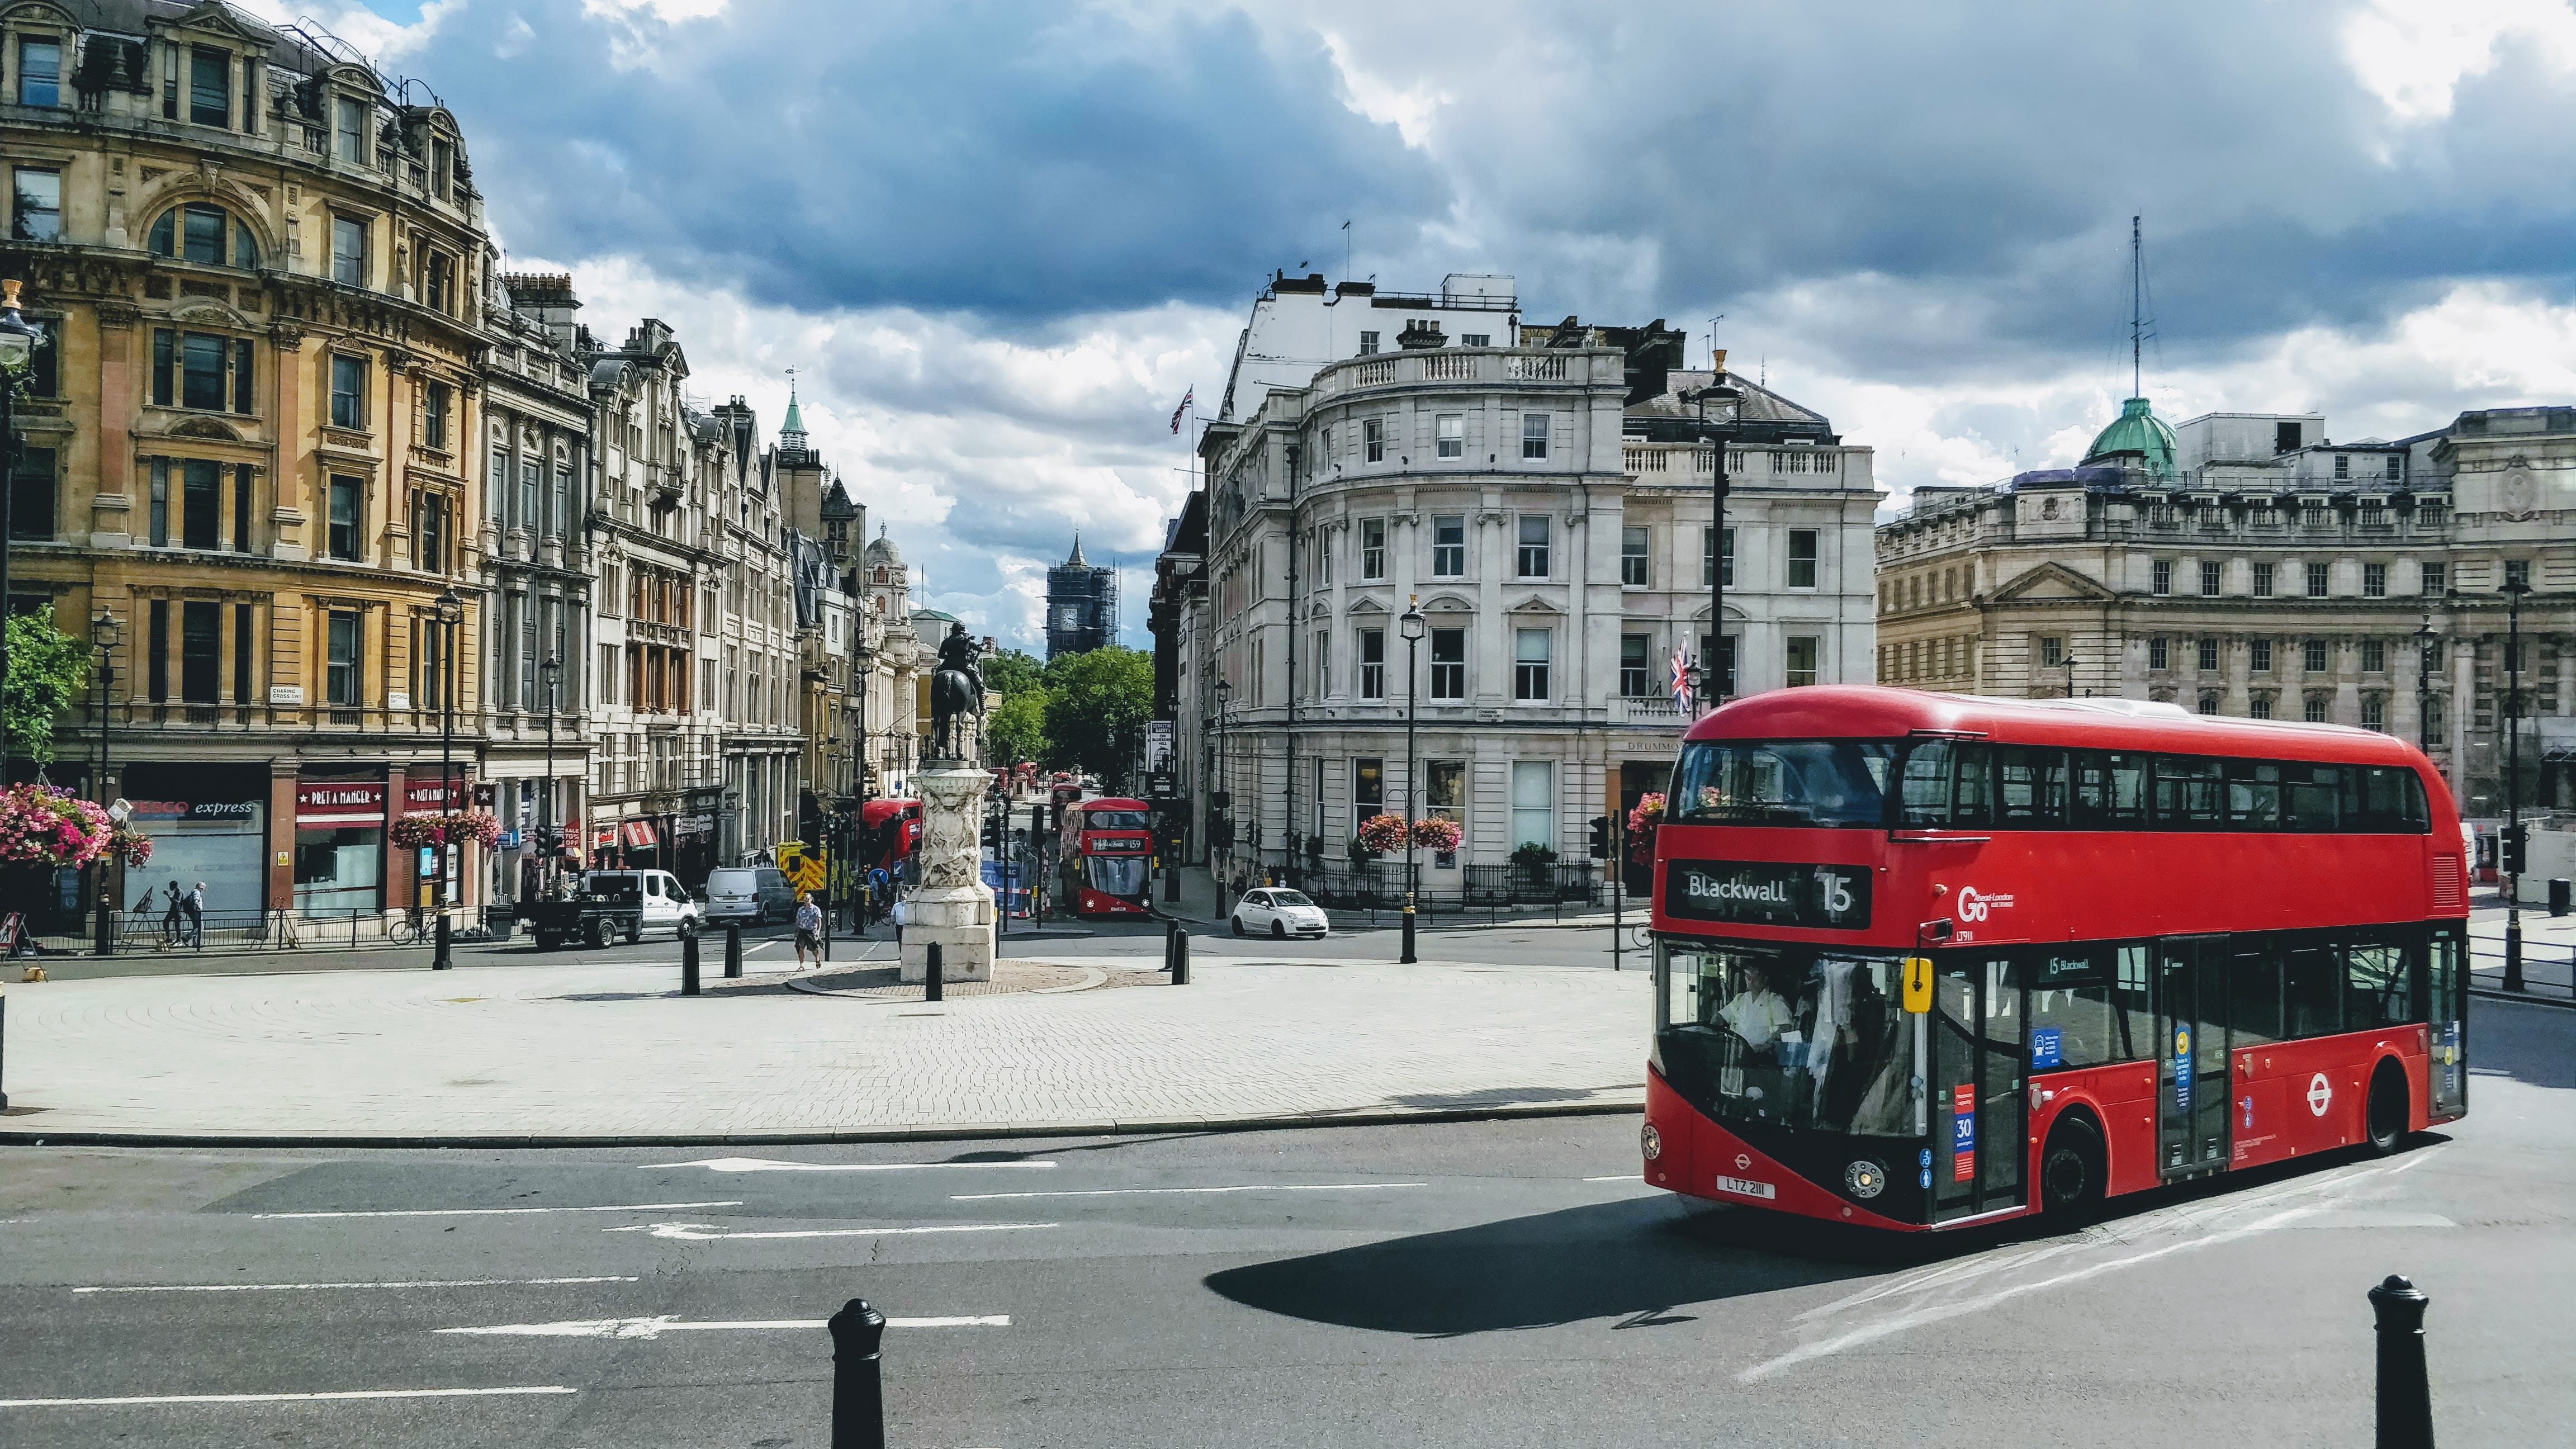 Red bus in London streets